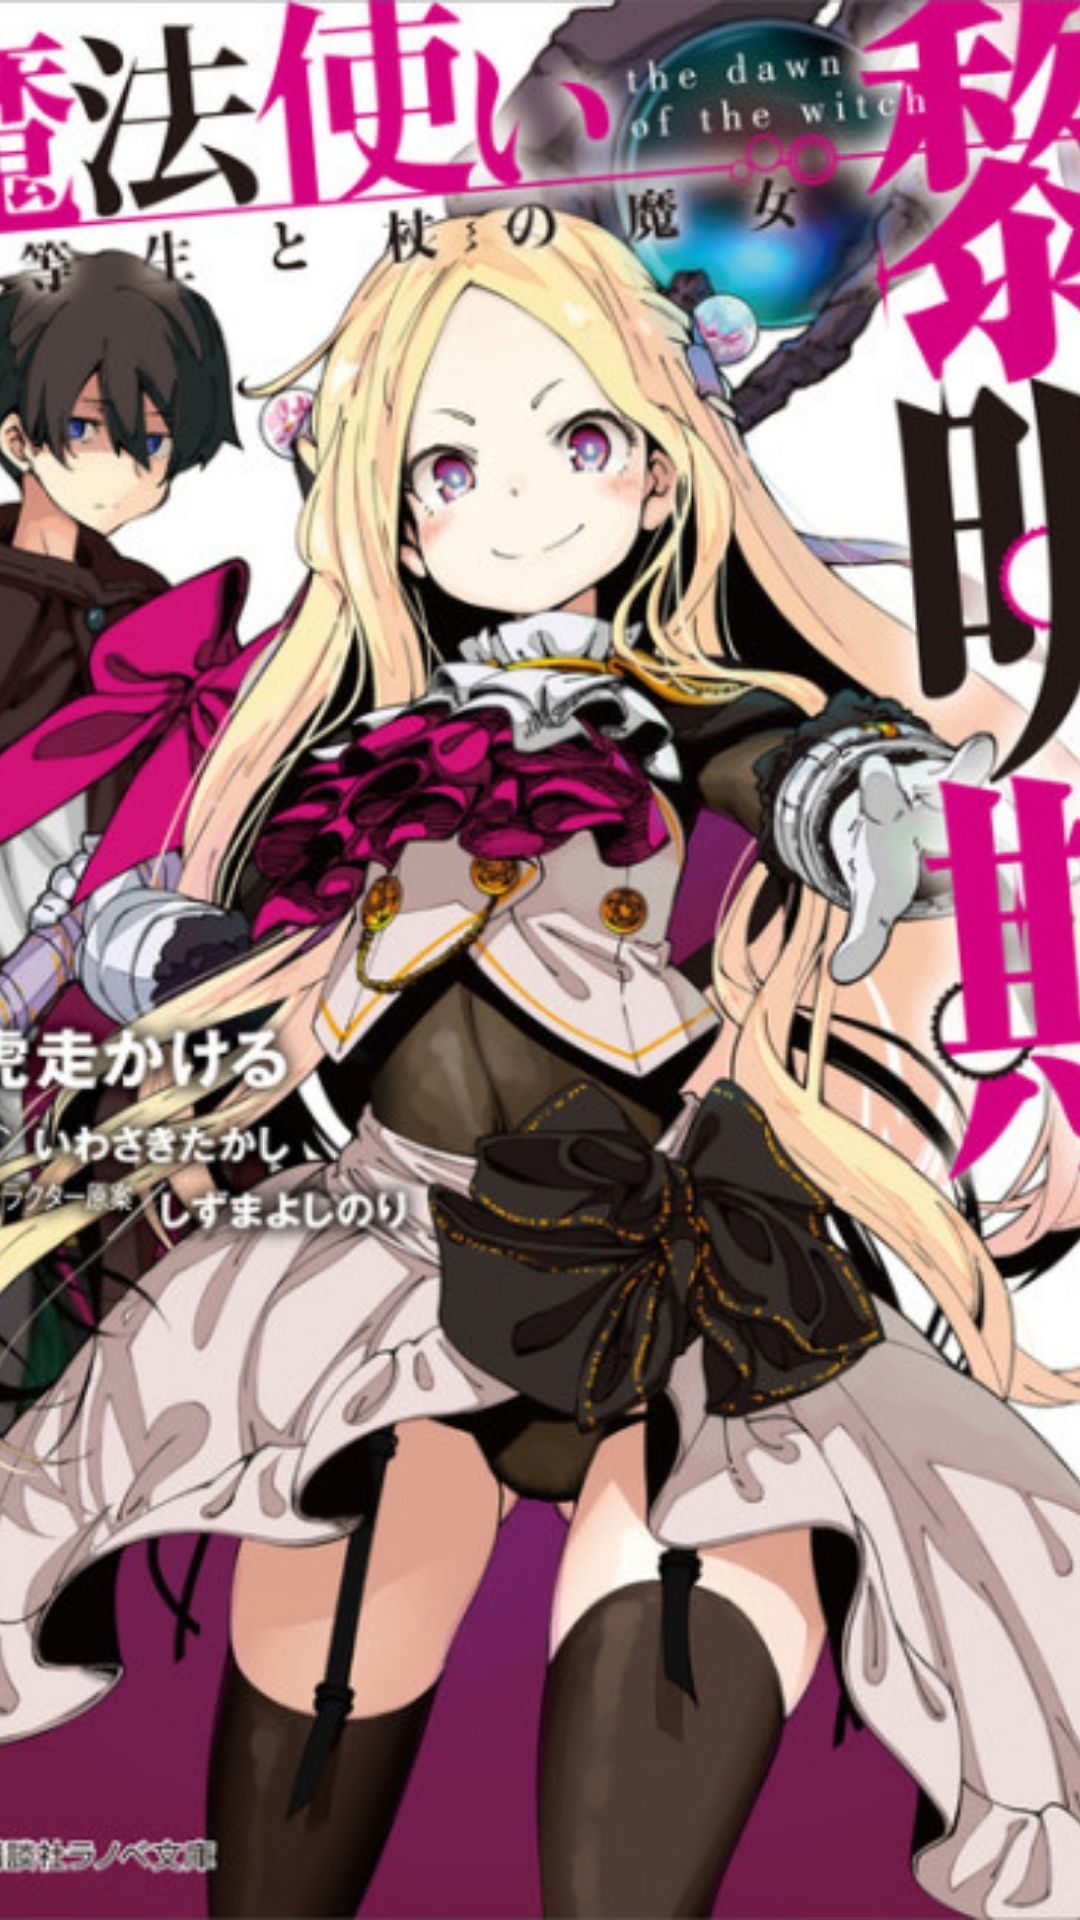 The Dawn of the Witch: Anime Adaptation, Second Volume